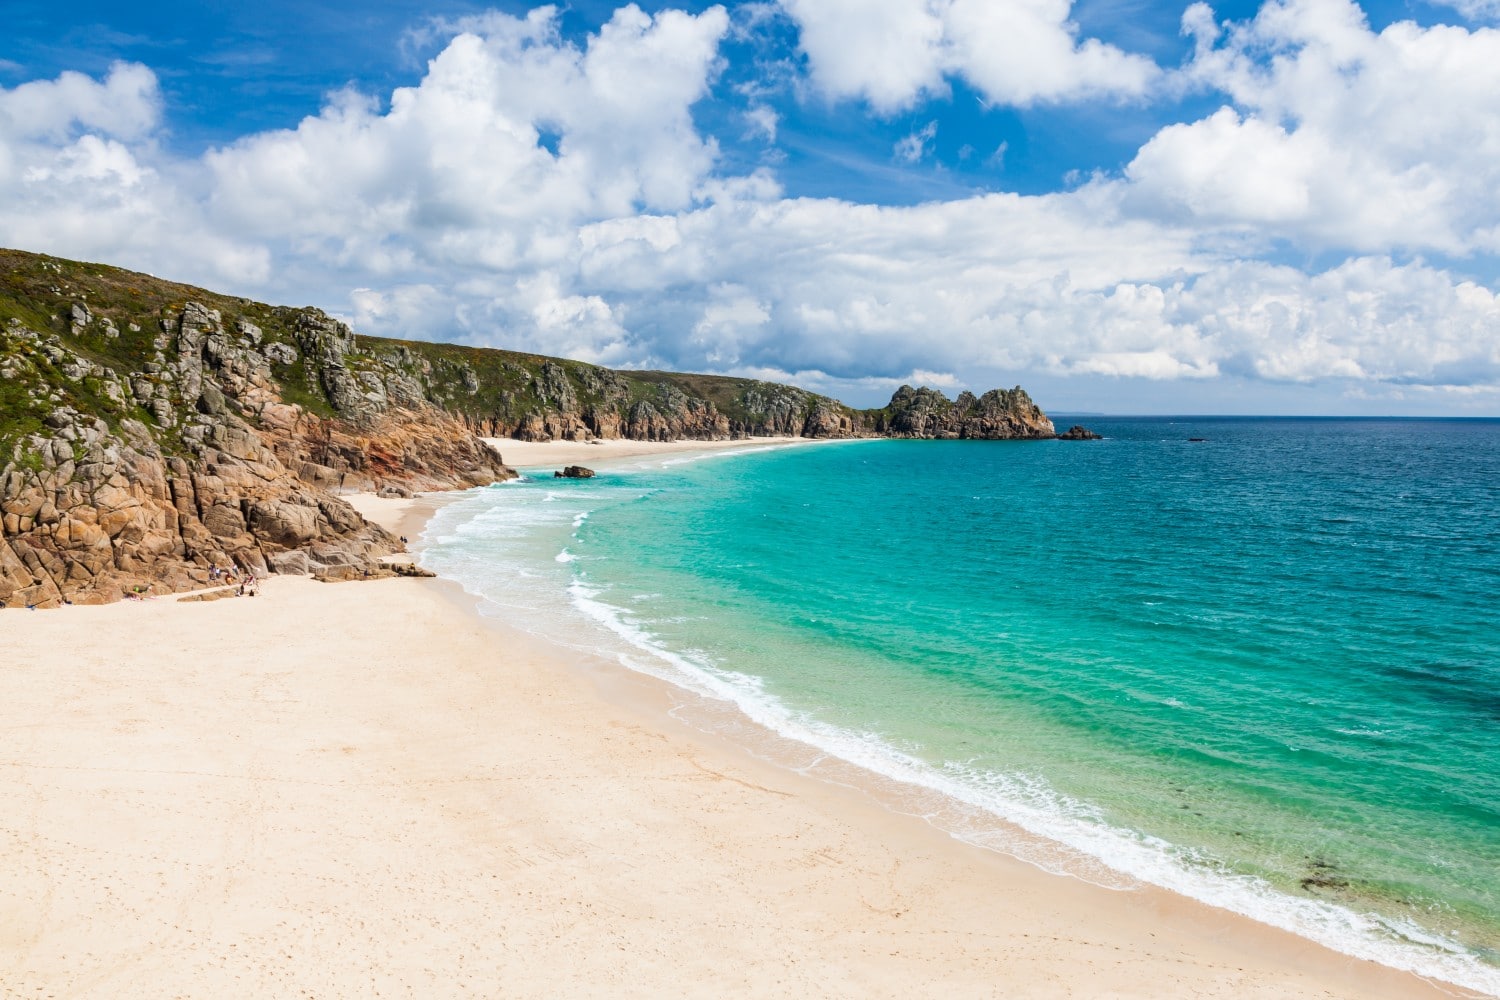 Porthcurno in Cornwall is an awesome sandy beach in the UK